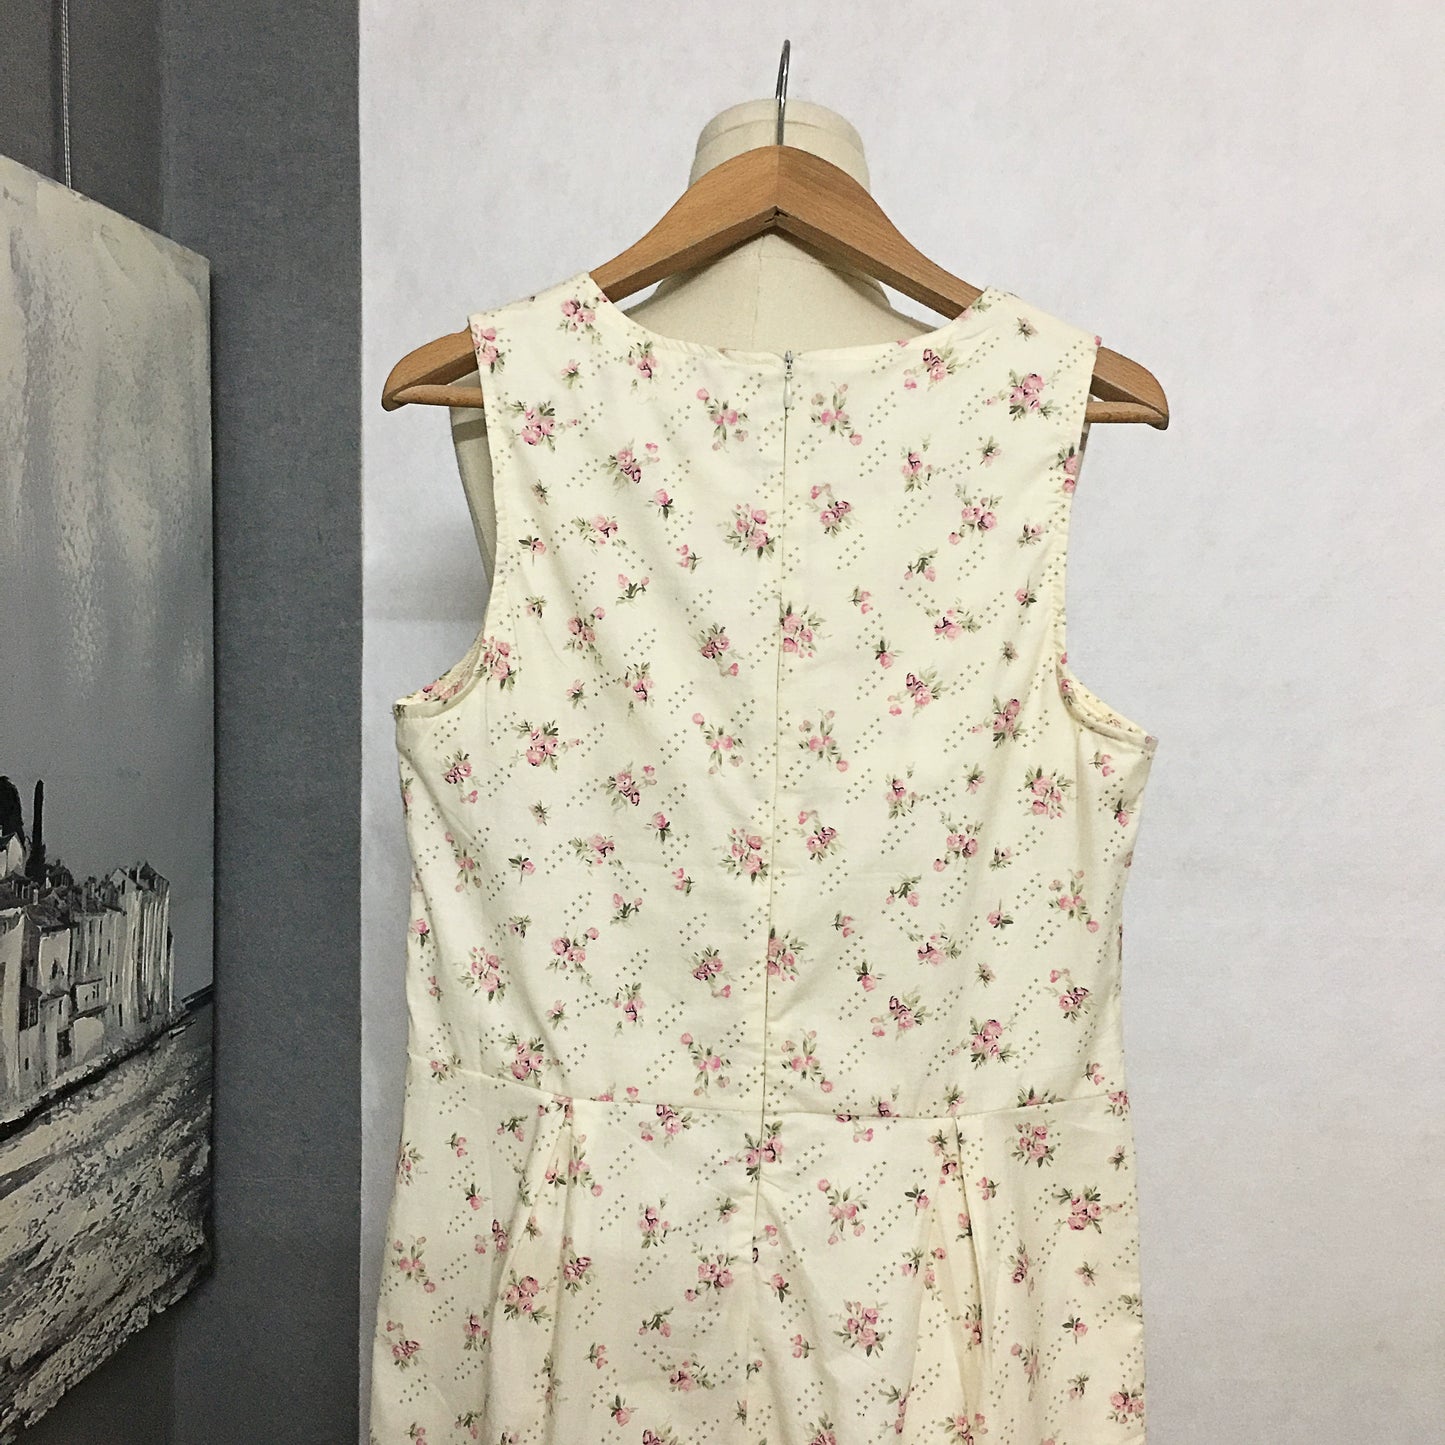 Vintage Art Floral Cotton Dress (Shipping included)